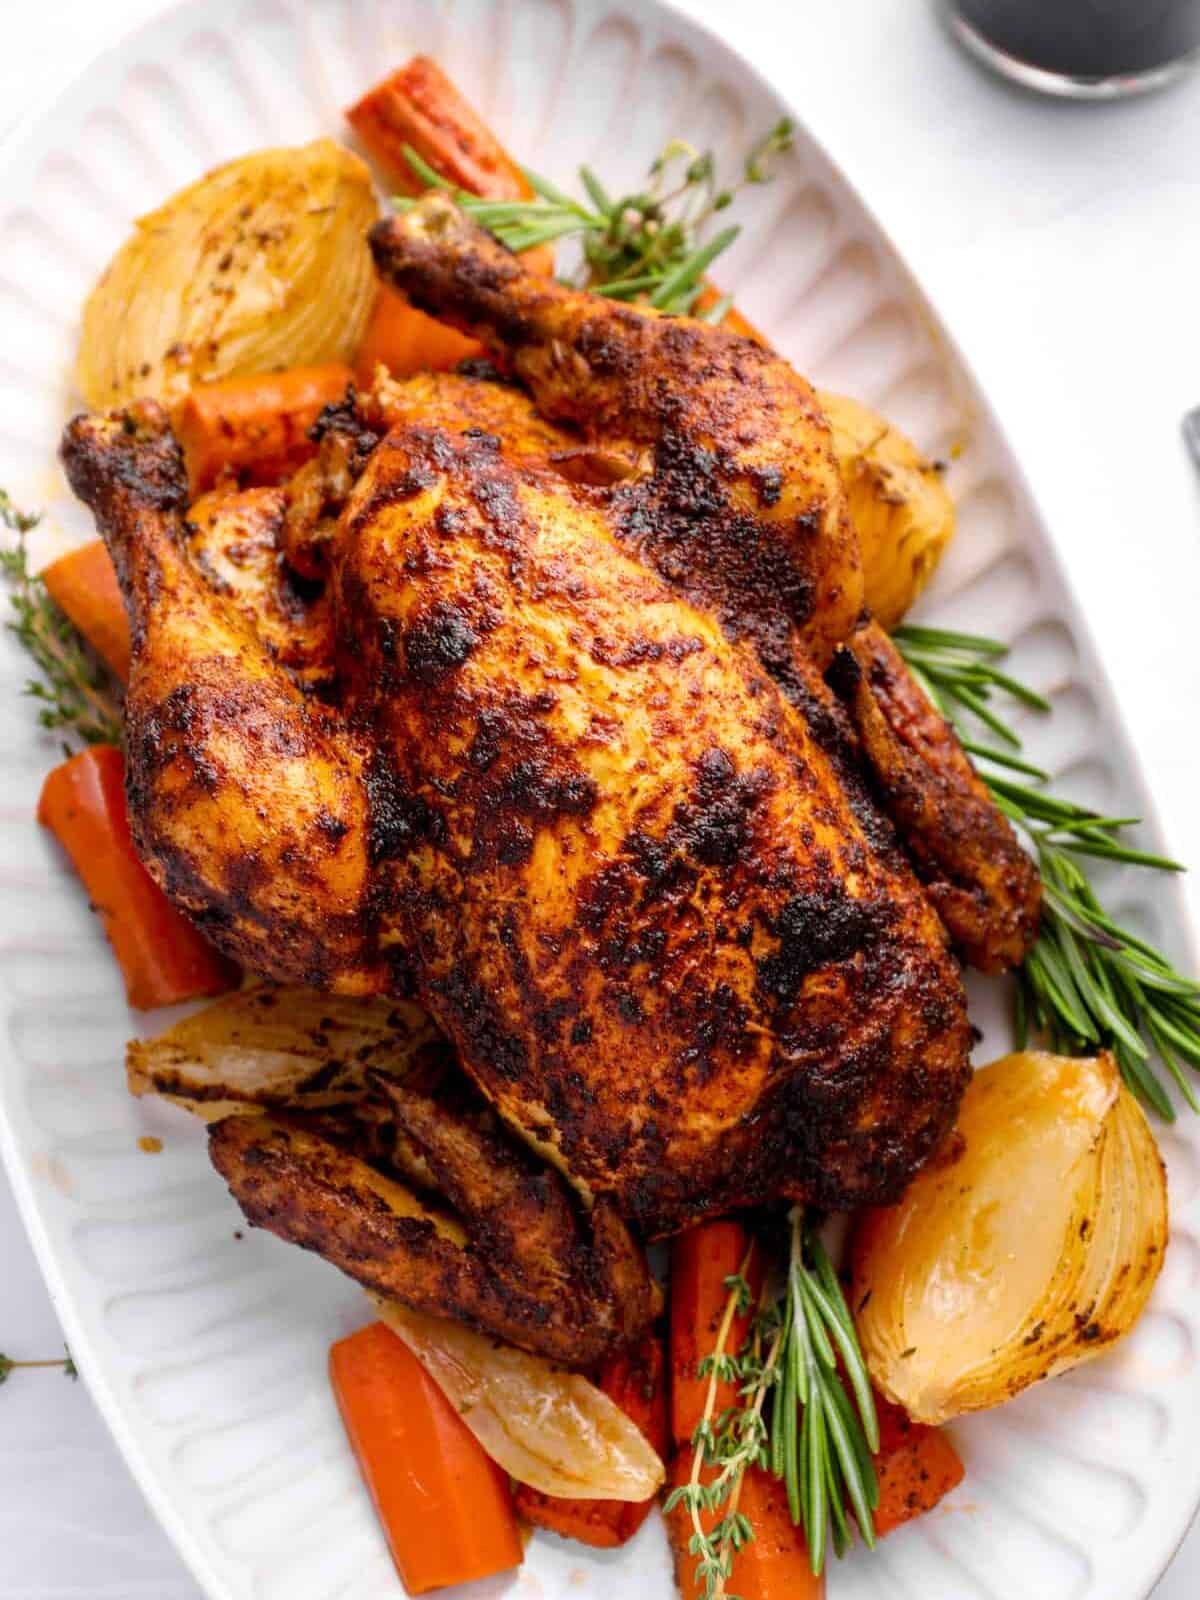 Crockpot Whole Chicken Recipe - The Cookie Rookie®